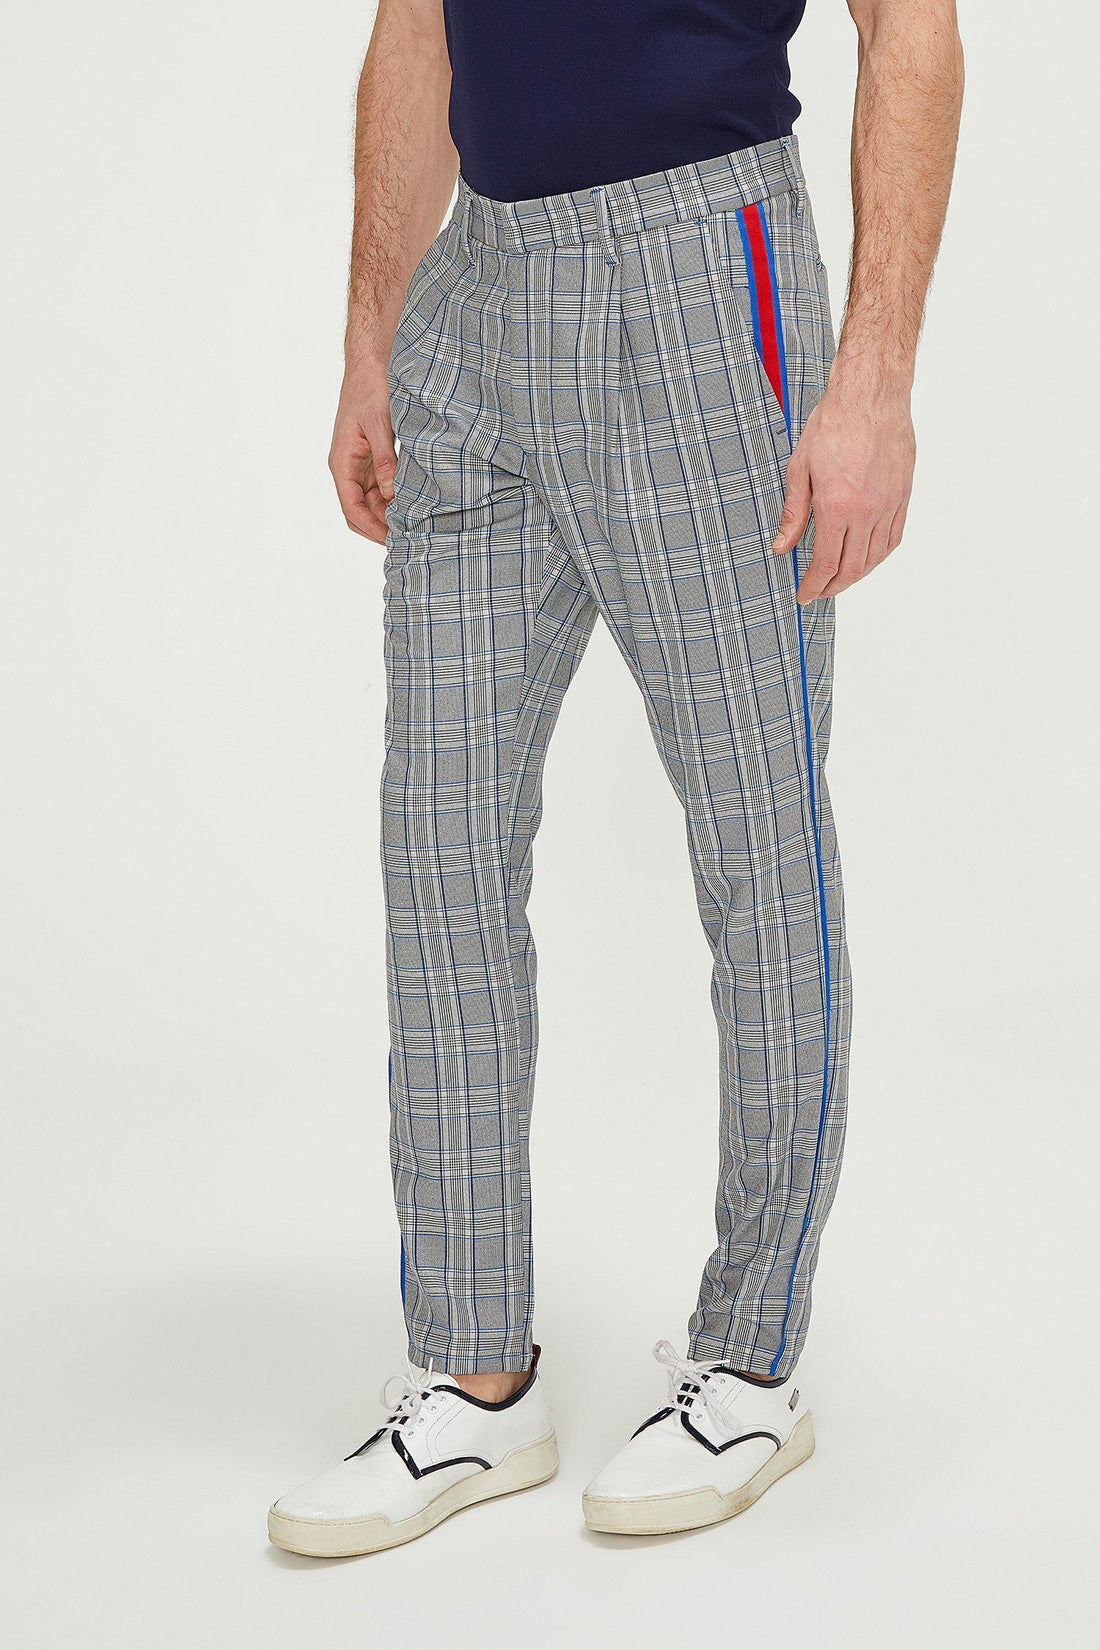 Patterned Slim Fit Causal Trouser - GREY SAX - Ron Tomson